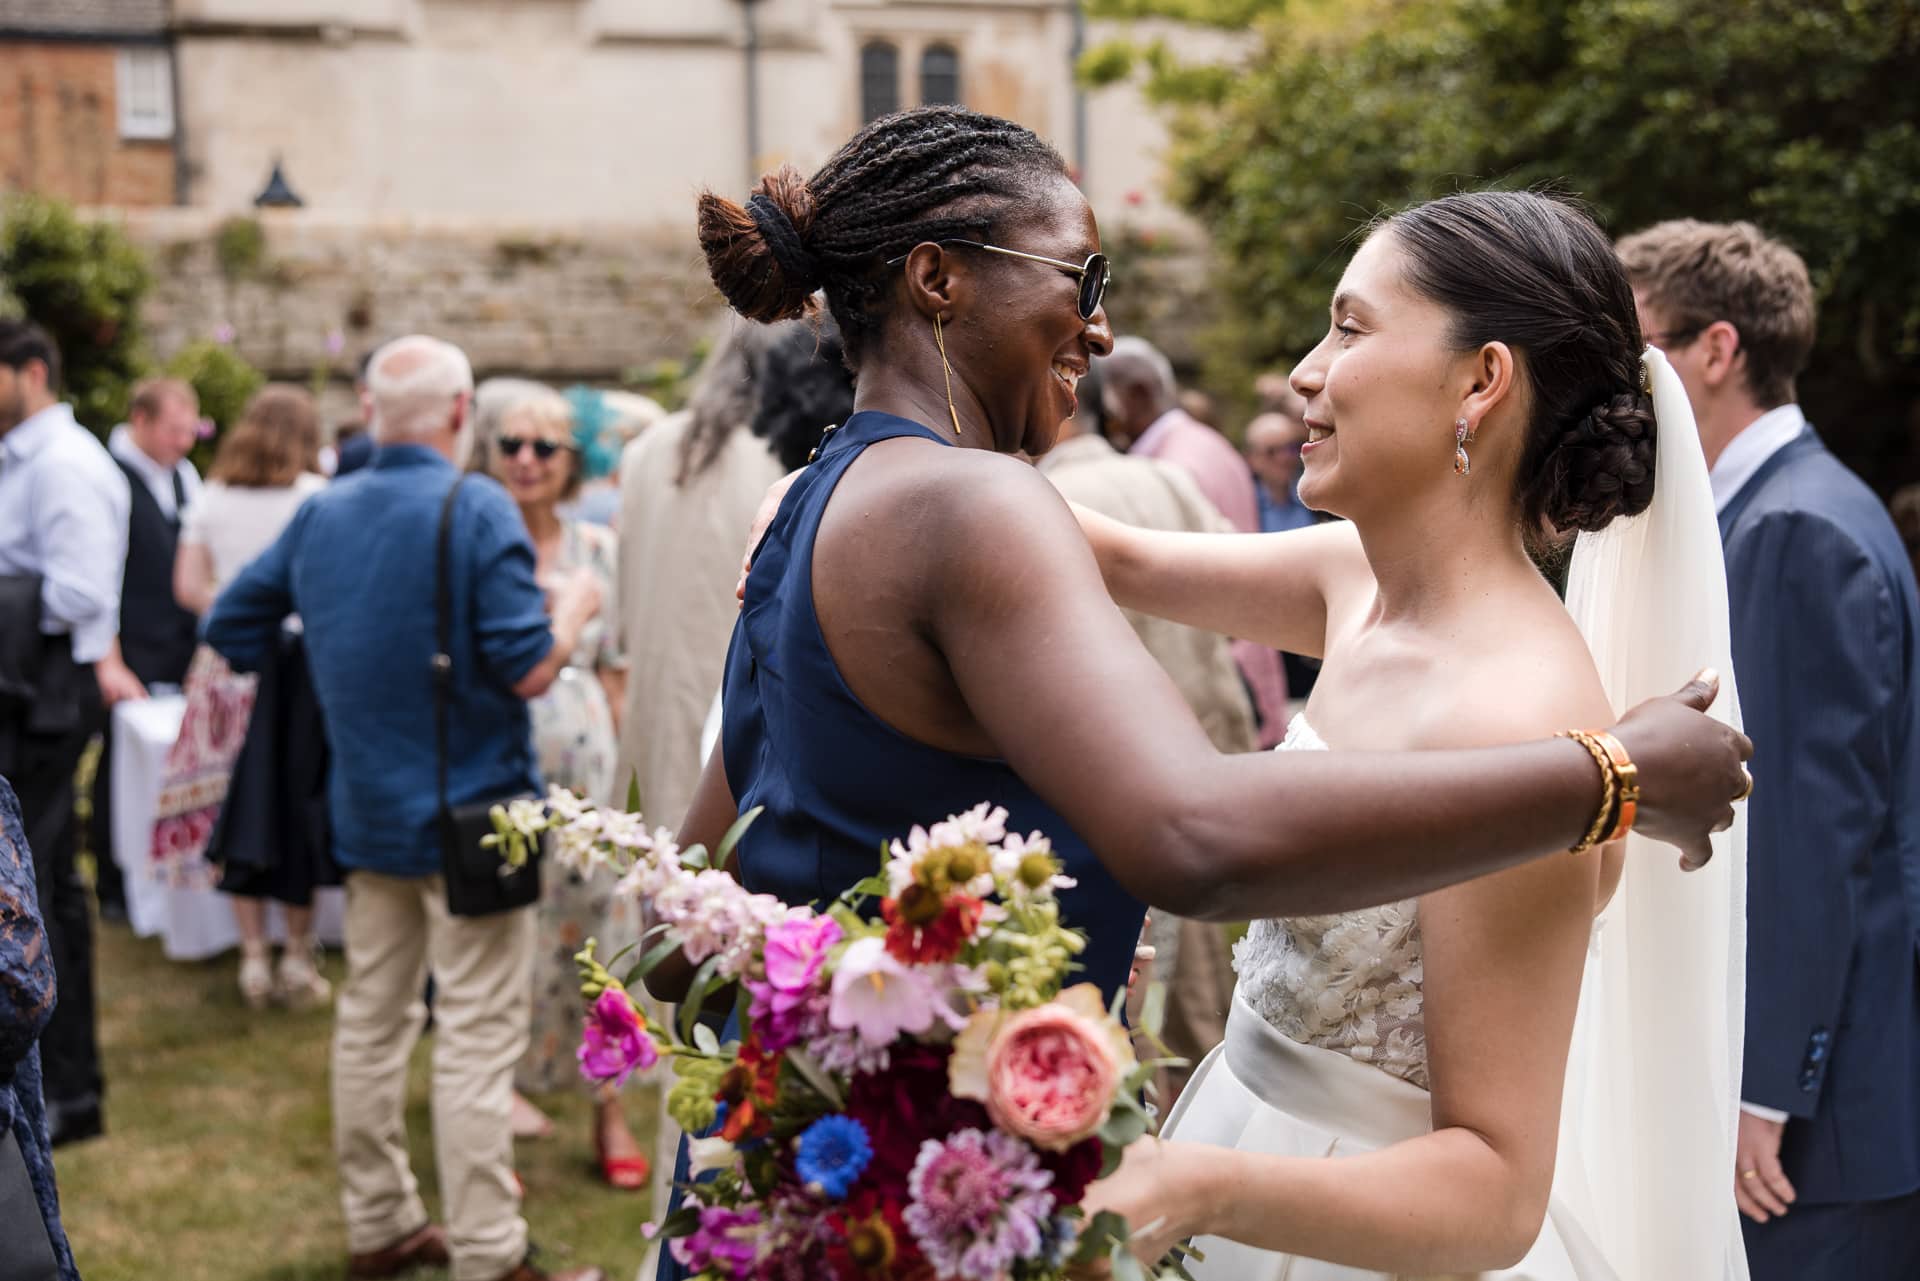 The Bride and Guest embracing each other in the Master’s Garden at Pembroke College